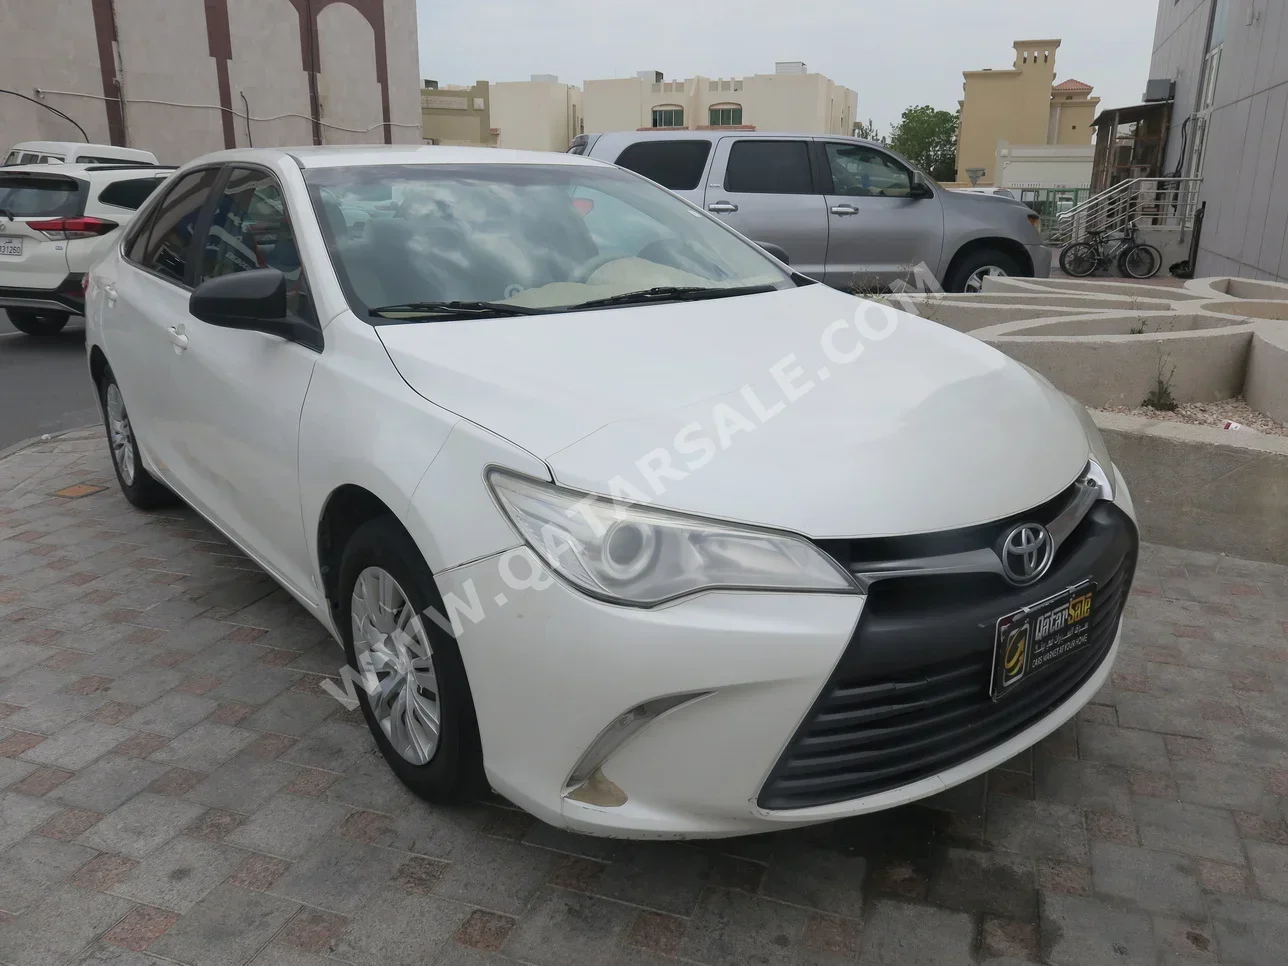 Toyota  Camry  GL  2016  Automatic  156,000 Km  4 Cylinder  Front Wheel Drive (FWD)  Sedan  White